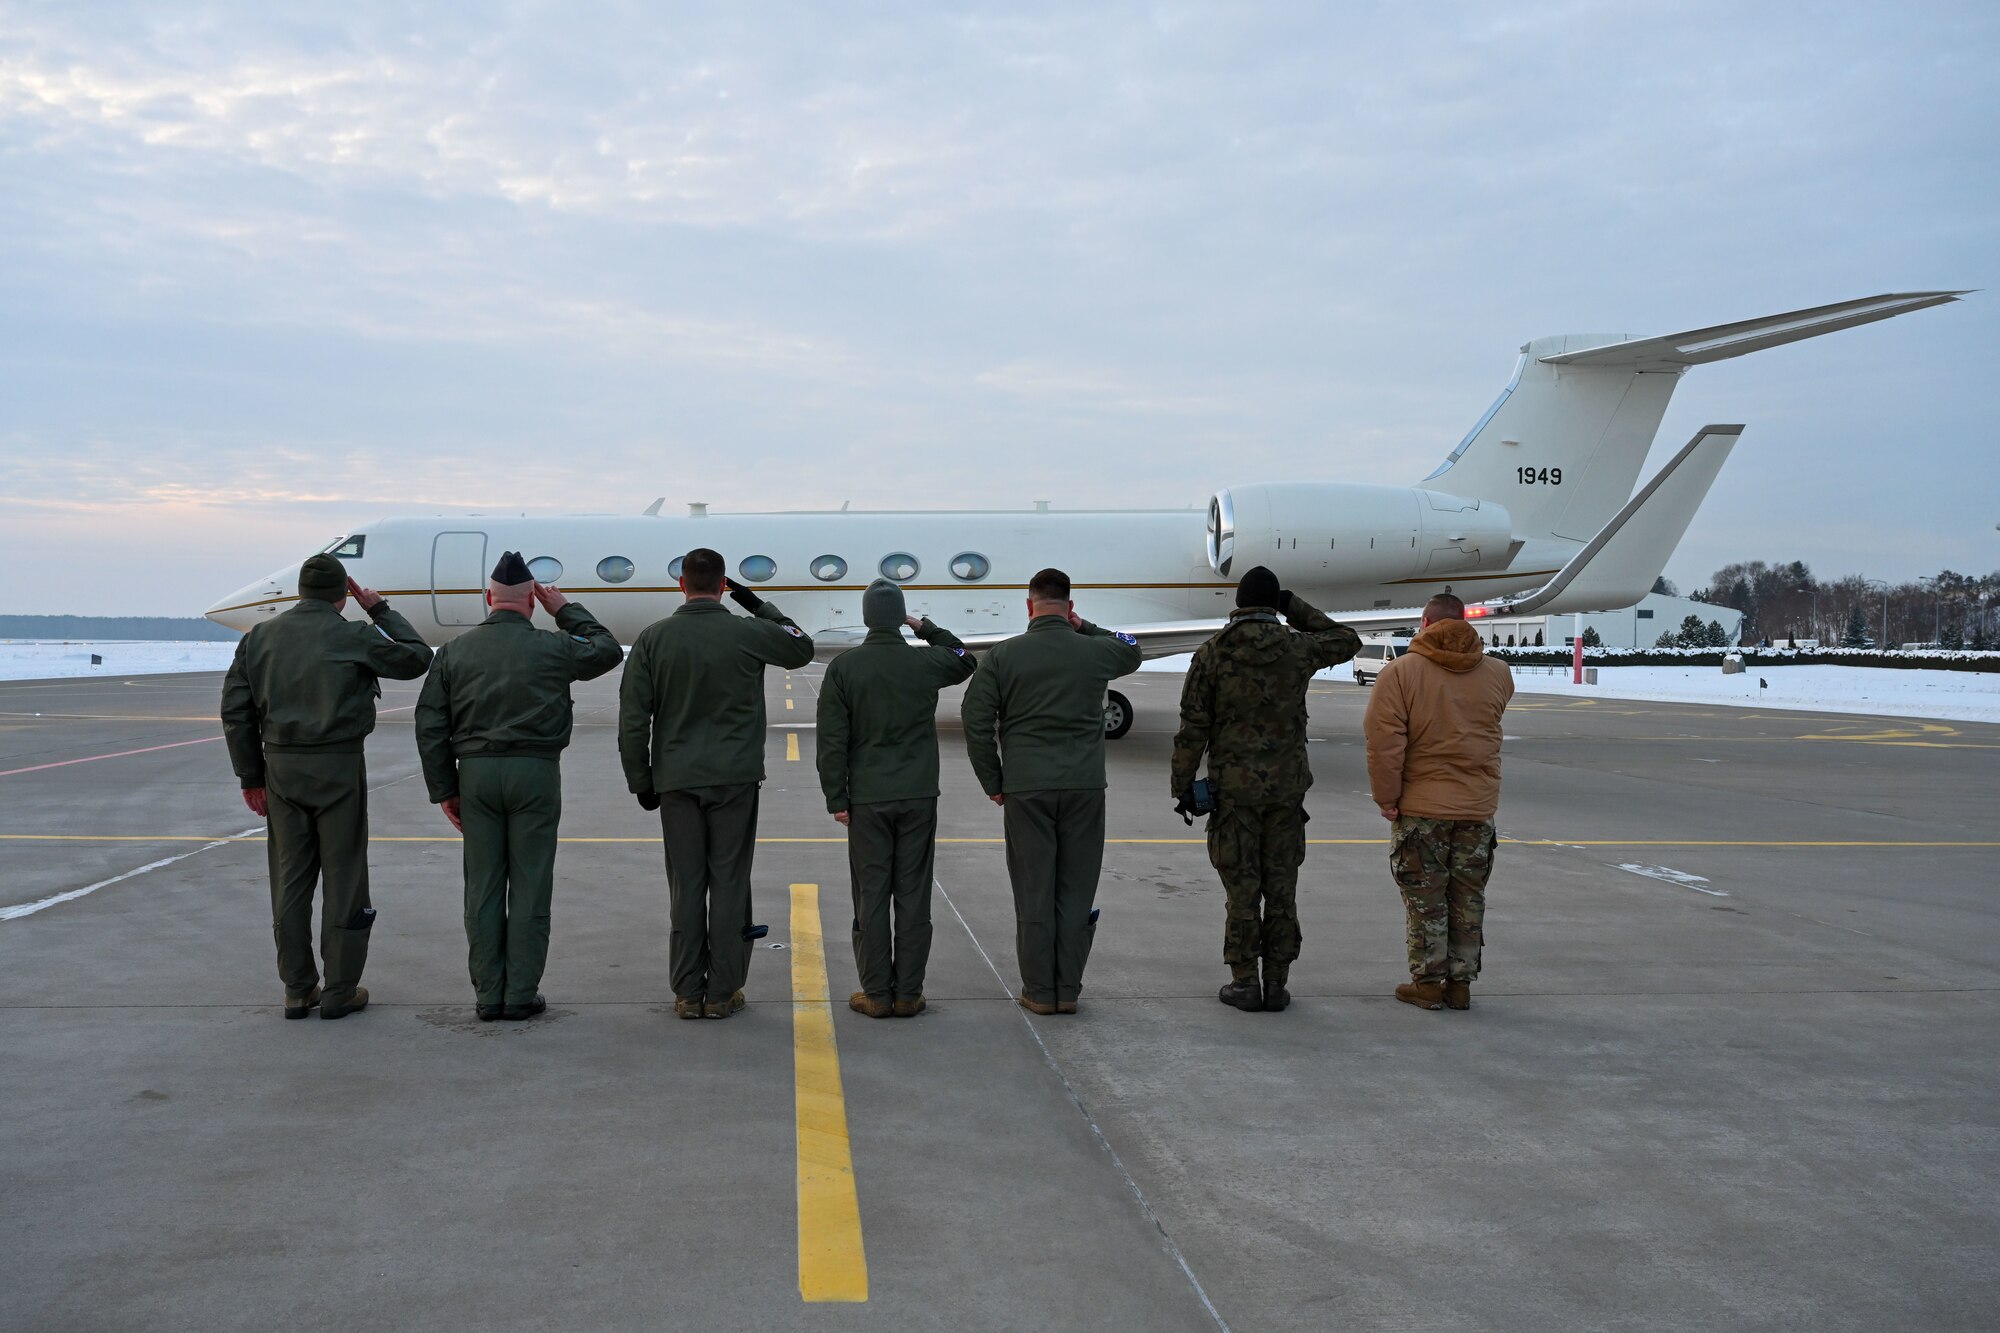 Military members salute in front of aircraft